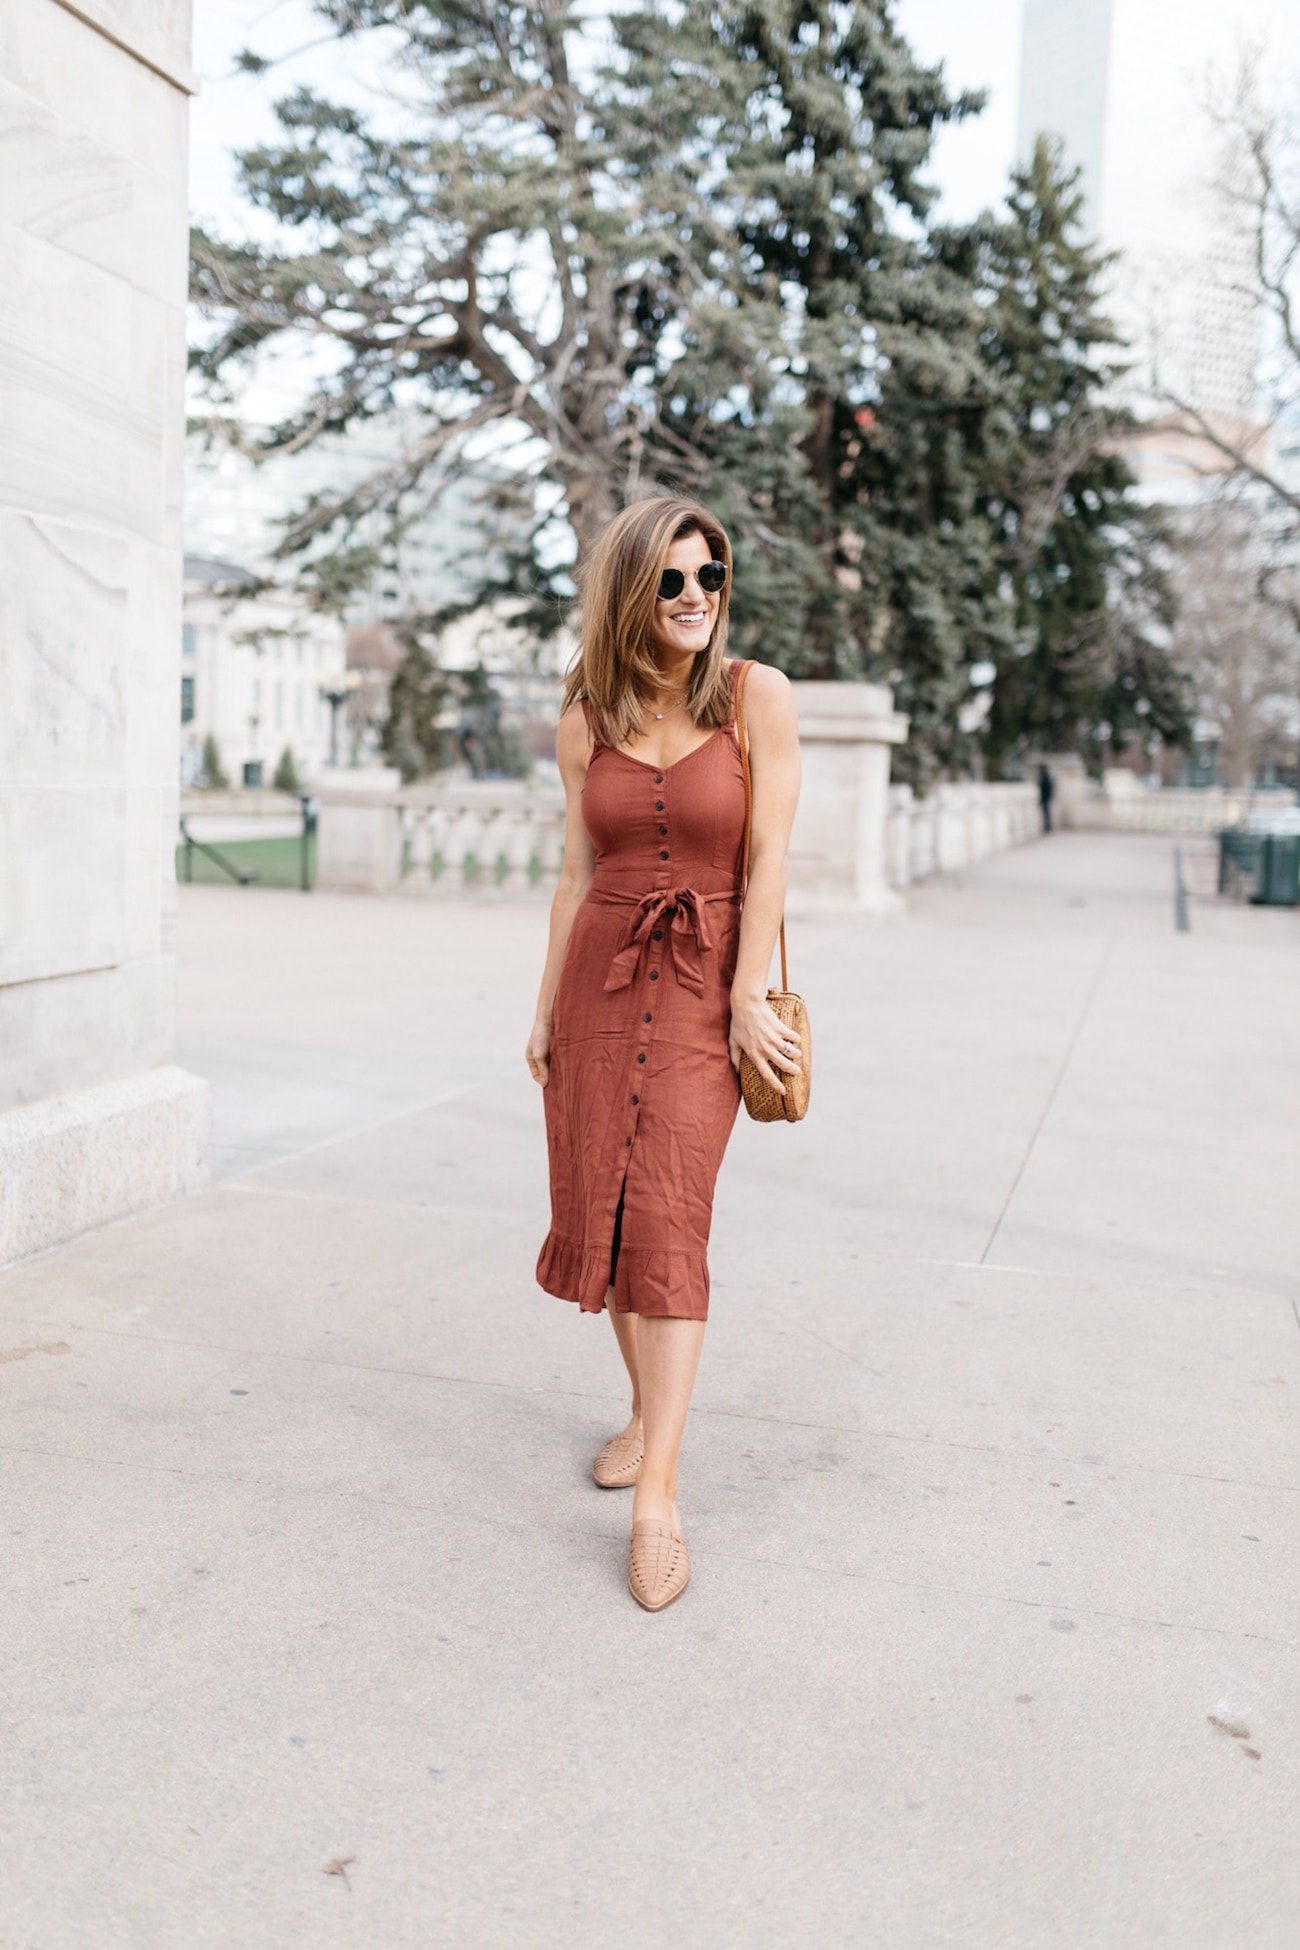 Brighton Keller wearing rust dress, brown mules and woven purse